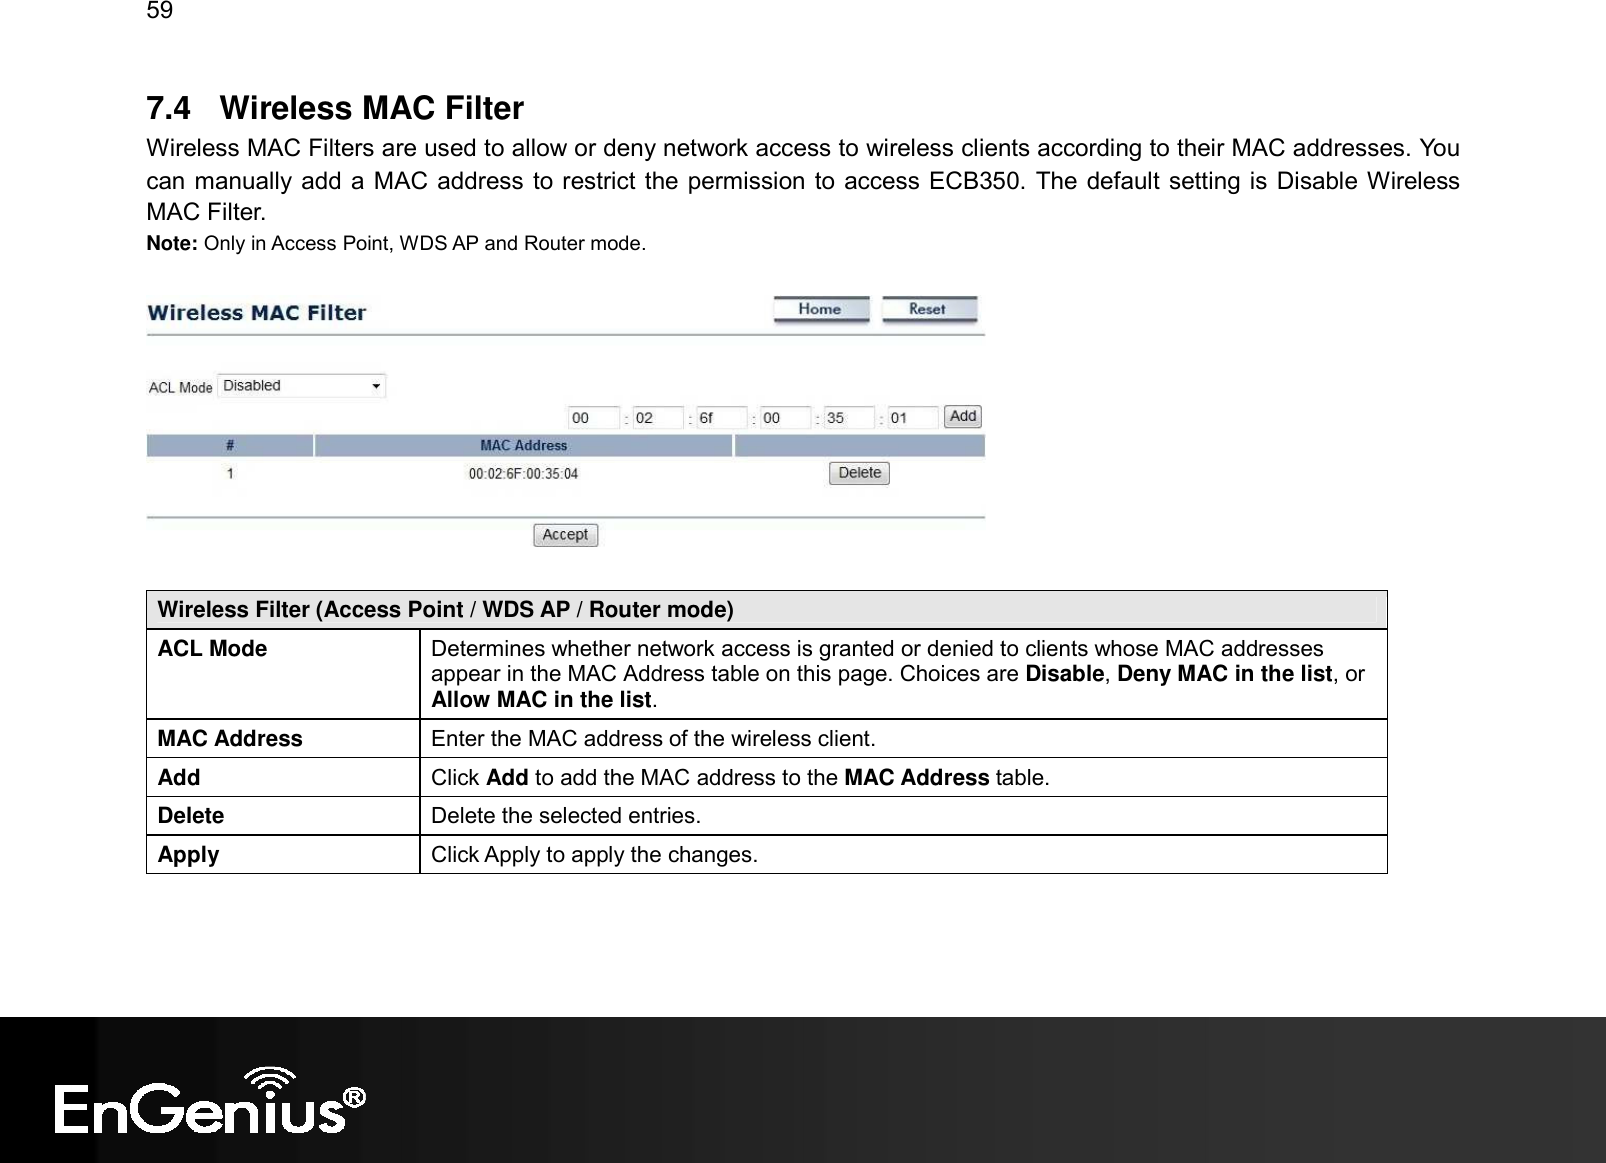 59  7.4  Wireless MAC Filter Wireless MAC Filters are used to allow or deny network access to wireless clients according to their MAC addresses. You can manually add a MAC address to restrict the permission to access ECB350. The default setting is Disable Wireless MAC Filter. Note: Only in Access Point, WDS AP and Router mode.    Wireless Filter (Access Point / WDS AP / Router mode) ACL Mode  Determines whether network access is granted or denied to clients whose MAC addresses appear in the MAC Address table on this page. Choices are Disable, Deny MAC in the list, or Allow MAC in the list. MAC Address  Enter the MAC address of the wireless client. Add  Click Add to add the MAC address to the MAC Address table. Delete  Delete the selected entries. Apply  Click Apply to apply the changes.  